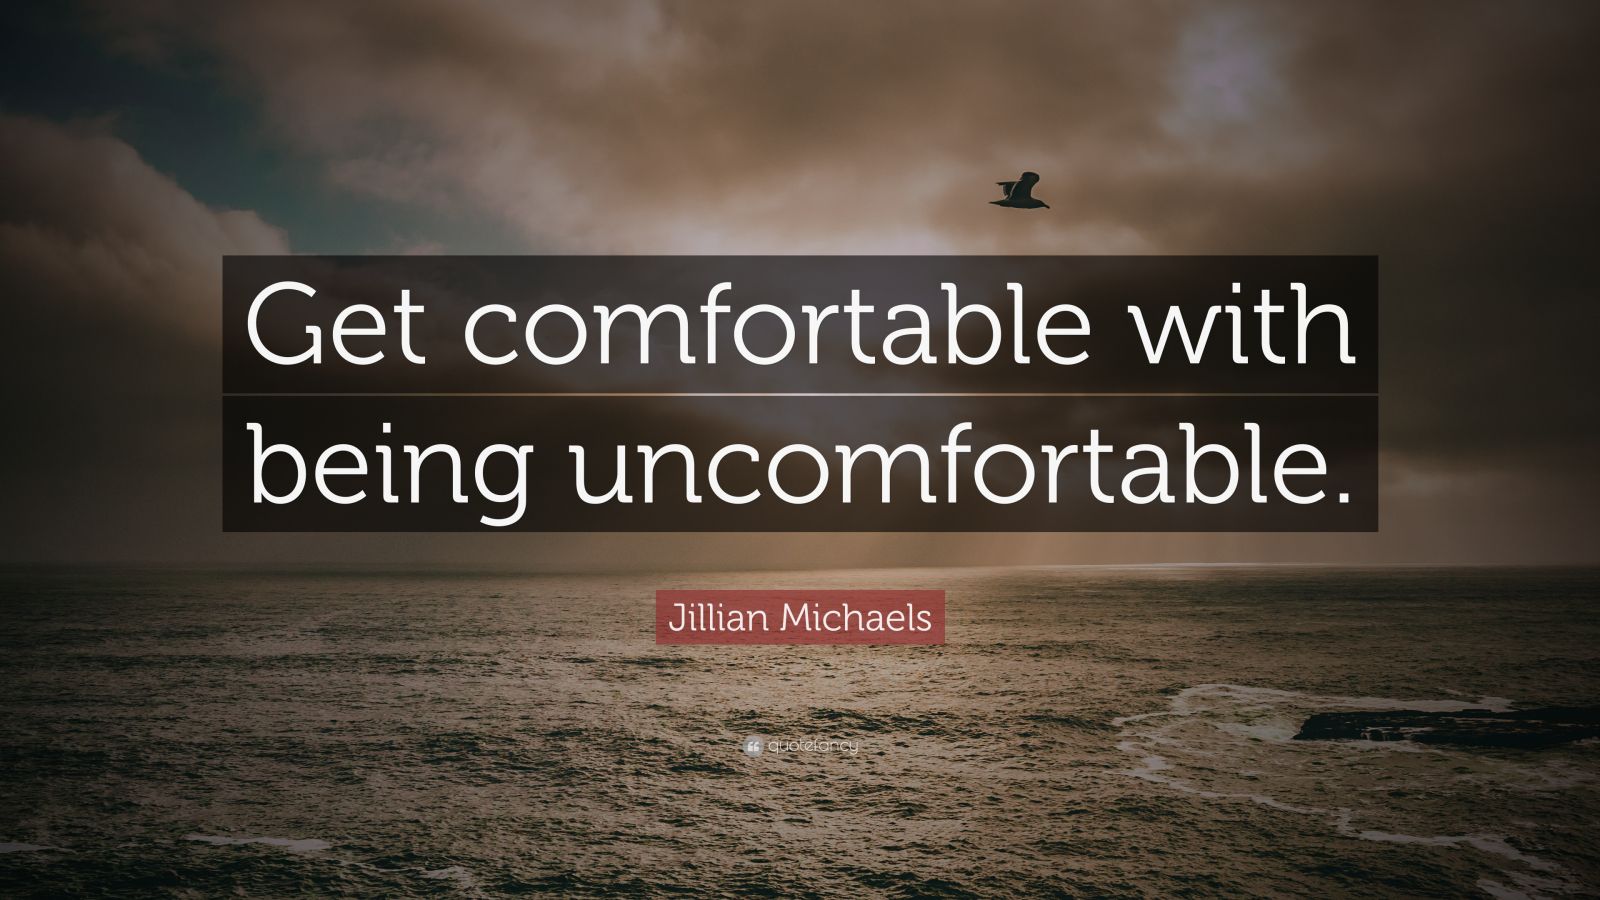 Jillian Michaels Quote: “Get comfortable with being uncomfortable.” (22